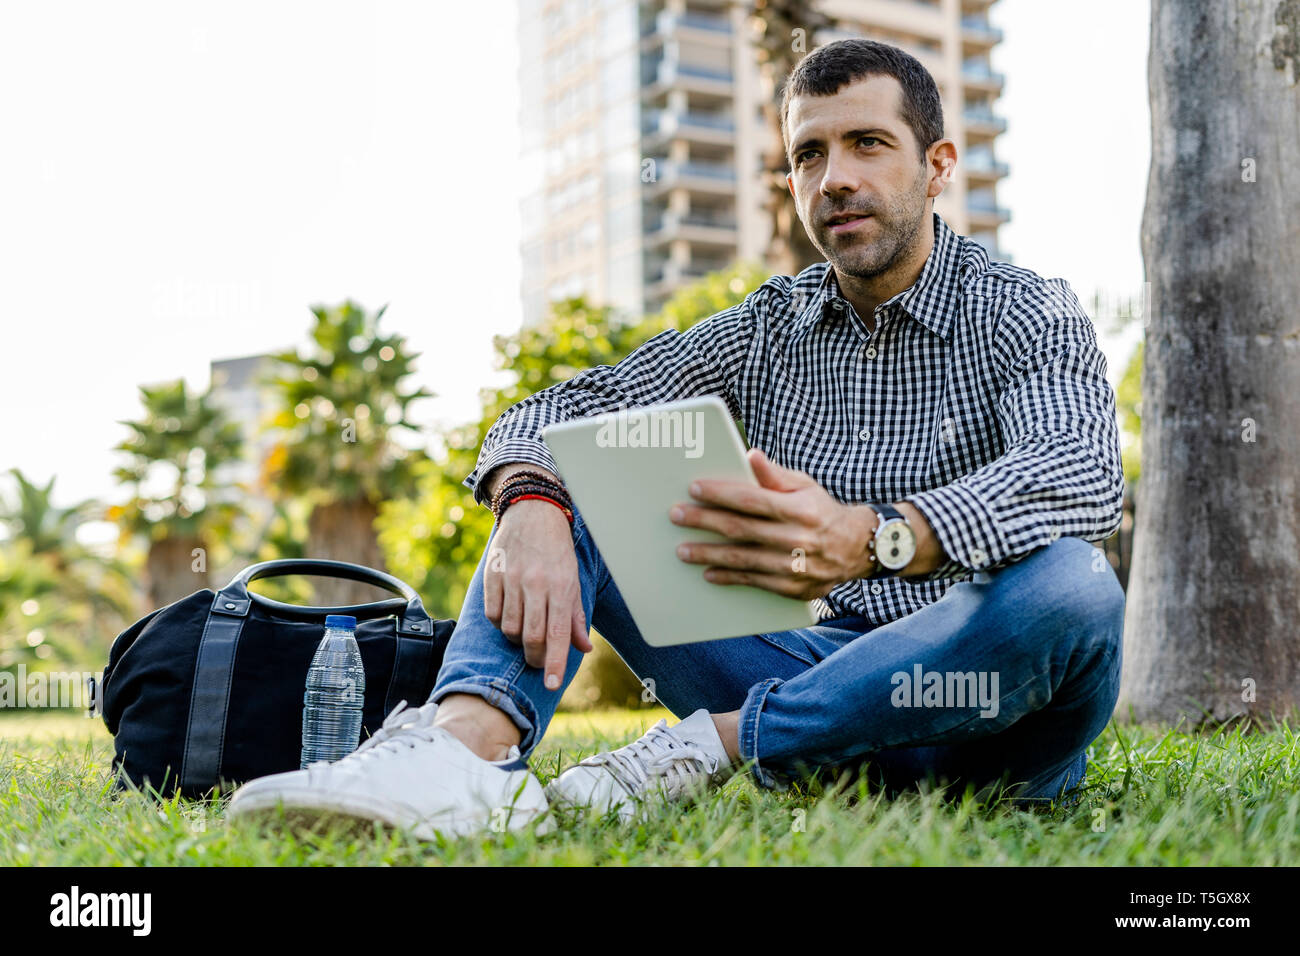 Portrait of man with digital tablet sitting on meadow in city park thinking Stock Photo